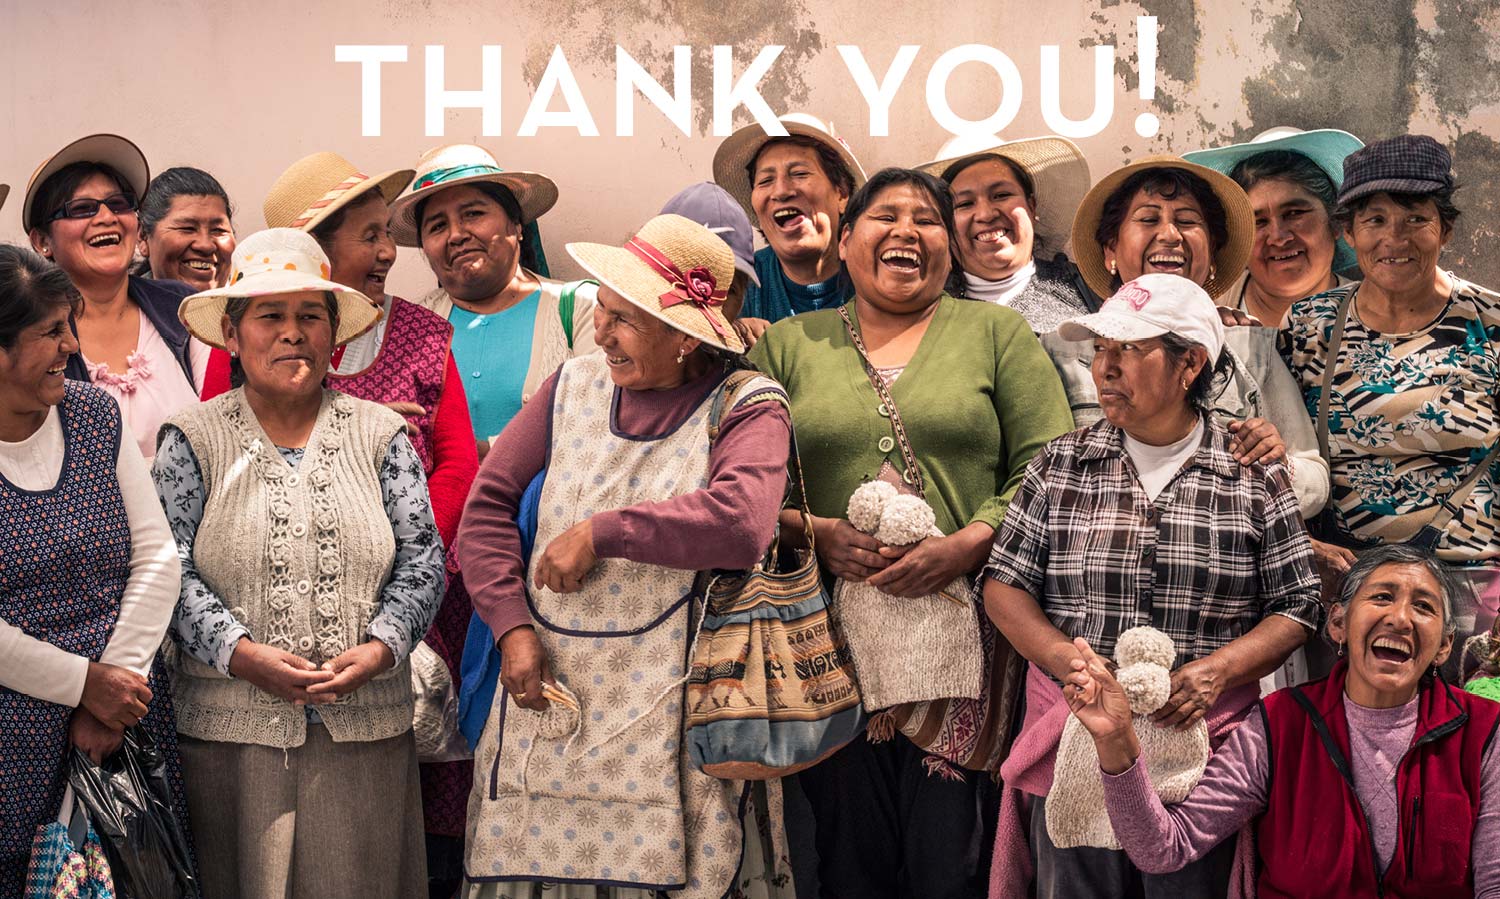 Thank you from our artisans and us!